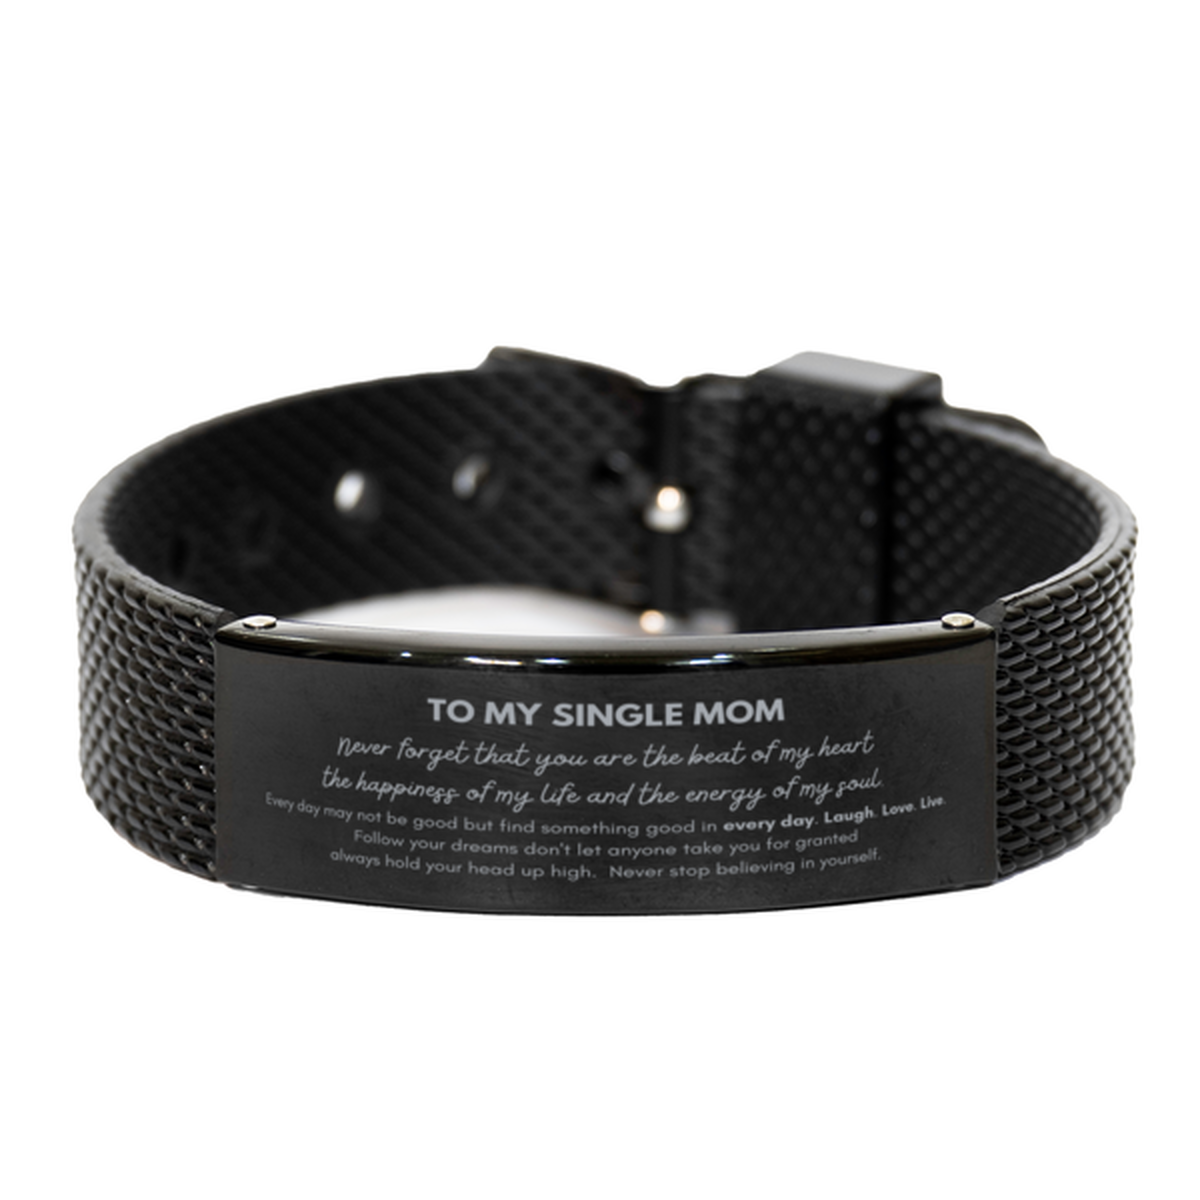 To My Single Mom Bracelet Gifts, Christmas Single Mom Black Shark Mesh Bracelet Present, Birthday Unique Motivational For Single Mom, To My Single Mom Never forget that you are the beat of my heart the happiness of my life and the energy of my soul